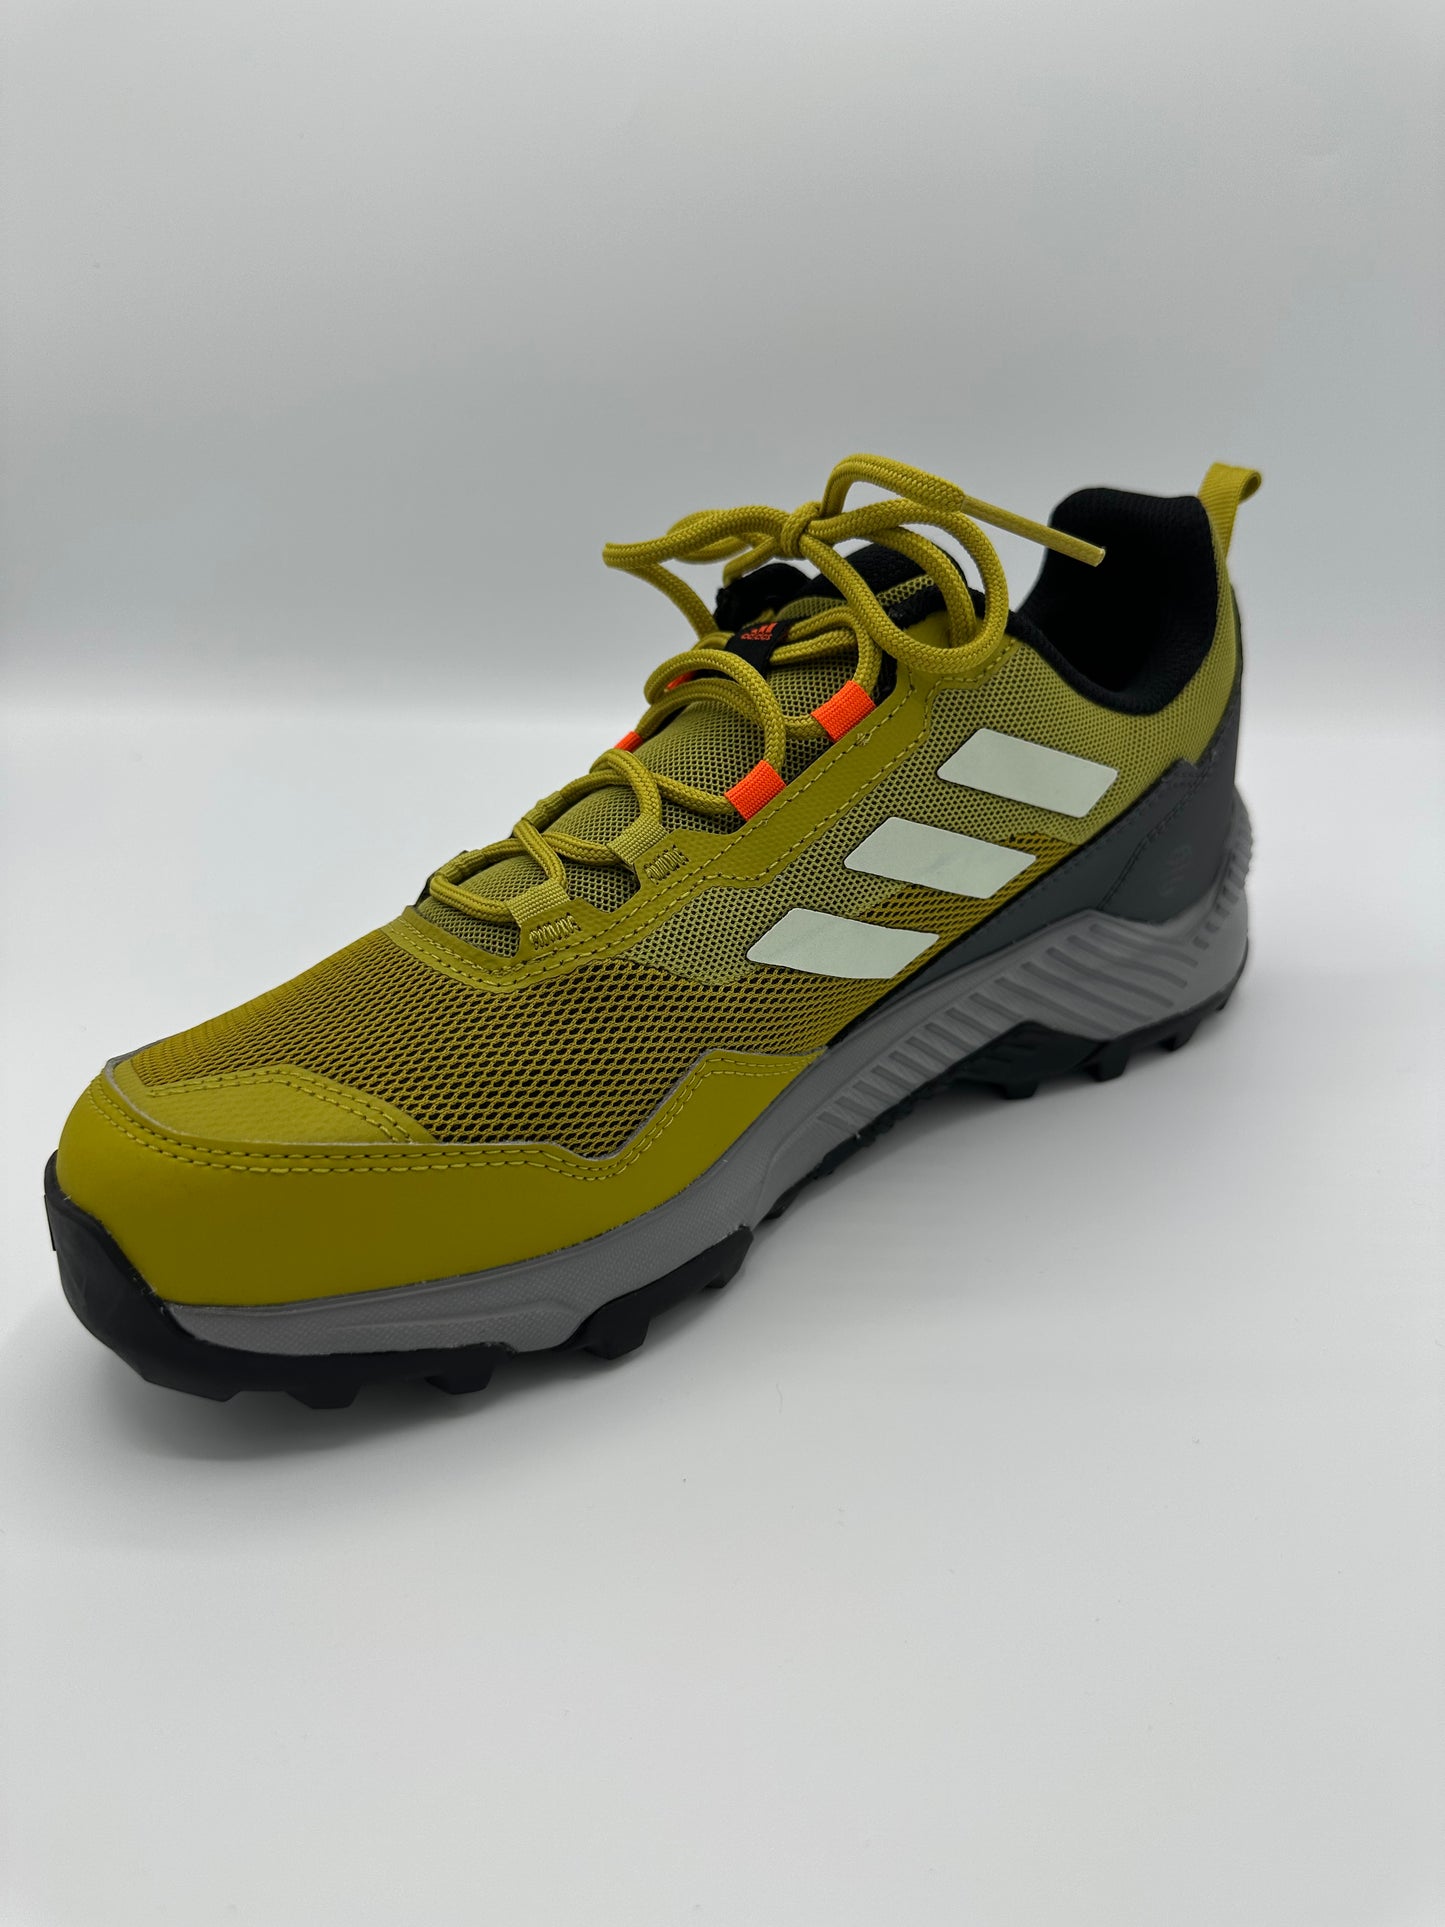 Adidas Eastrail 2.0 Men's Hiking Shoes